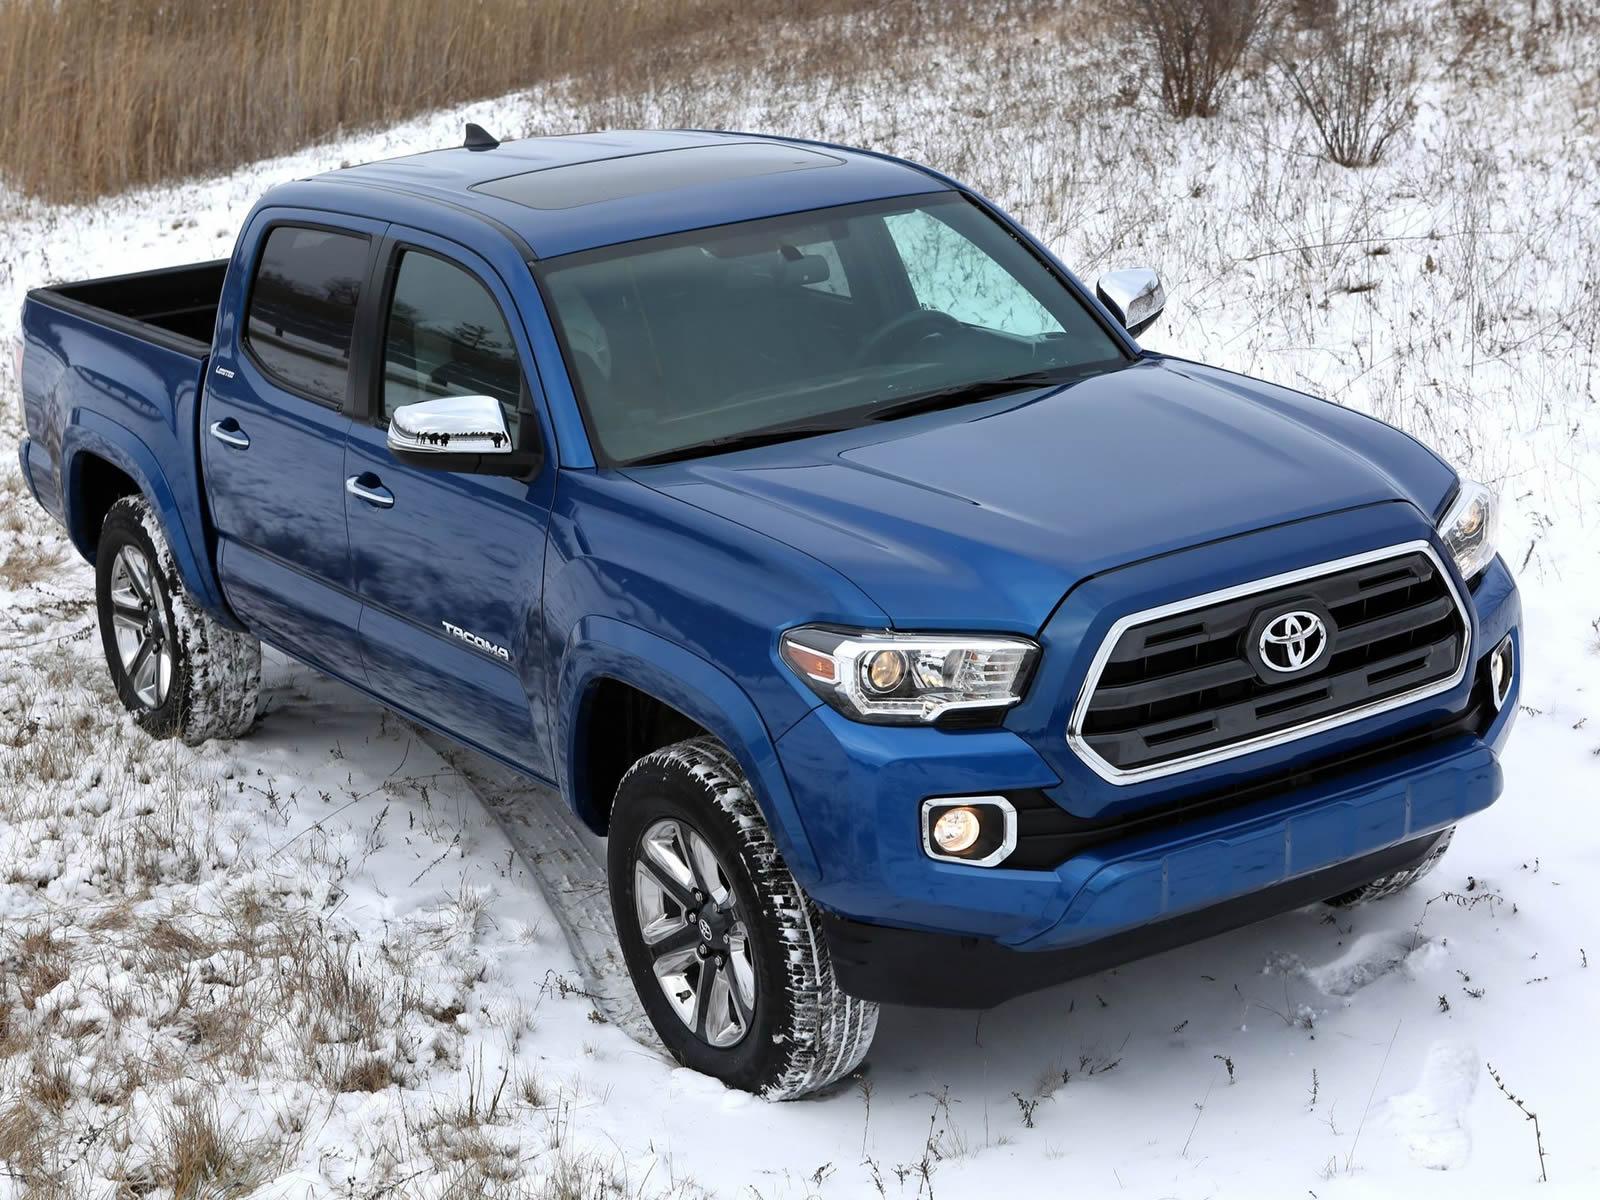 YEN 2016 TOYOTA TACOMA RESM GALERS